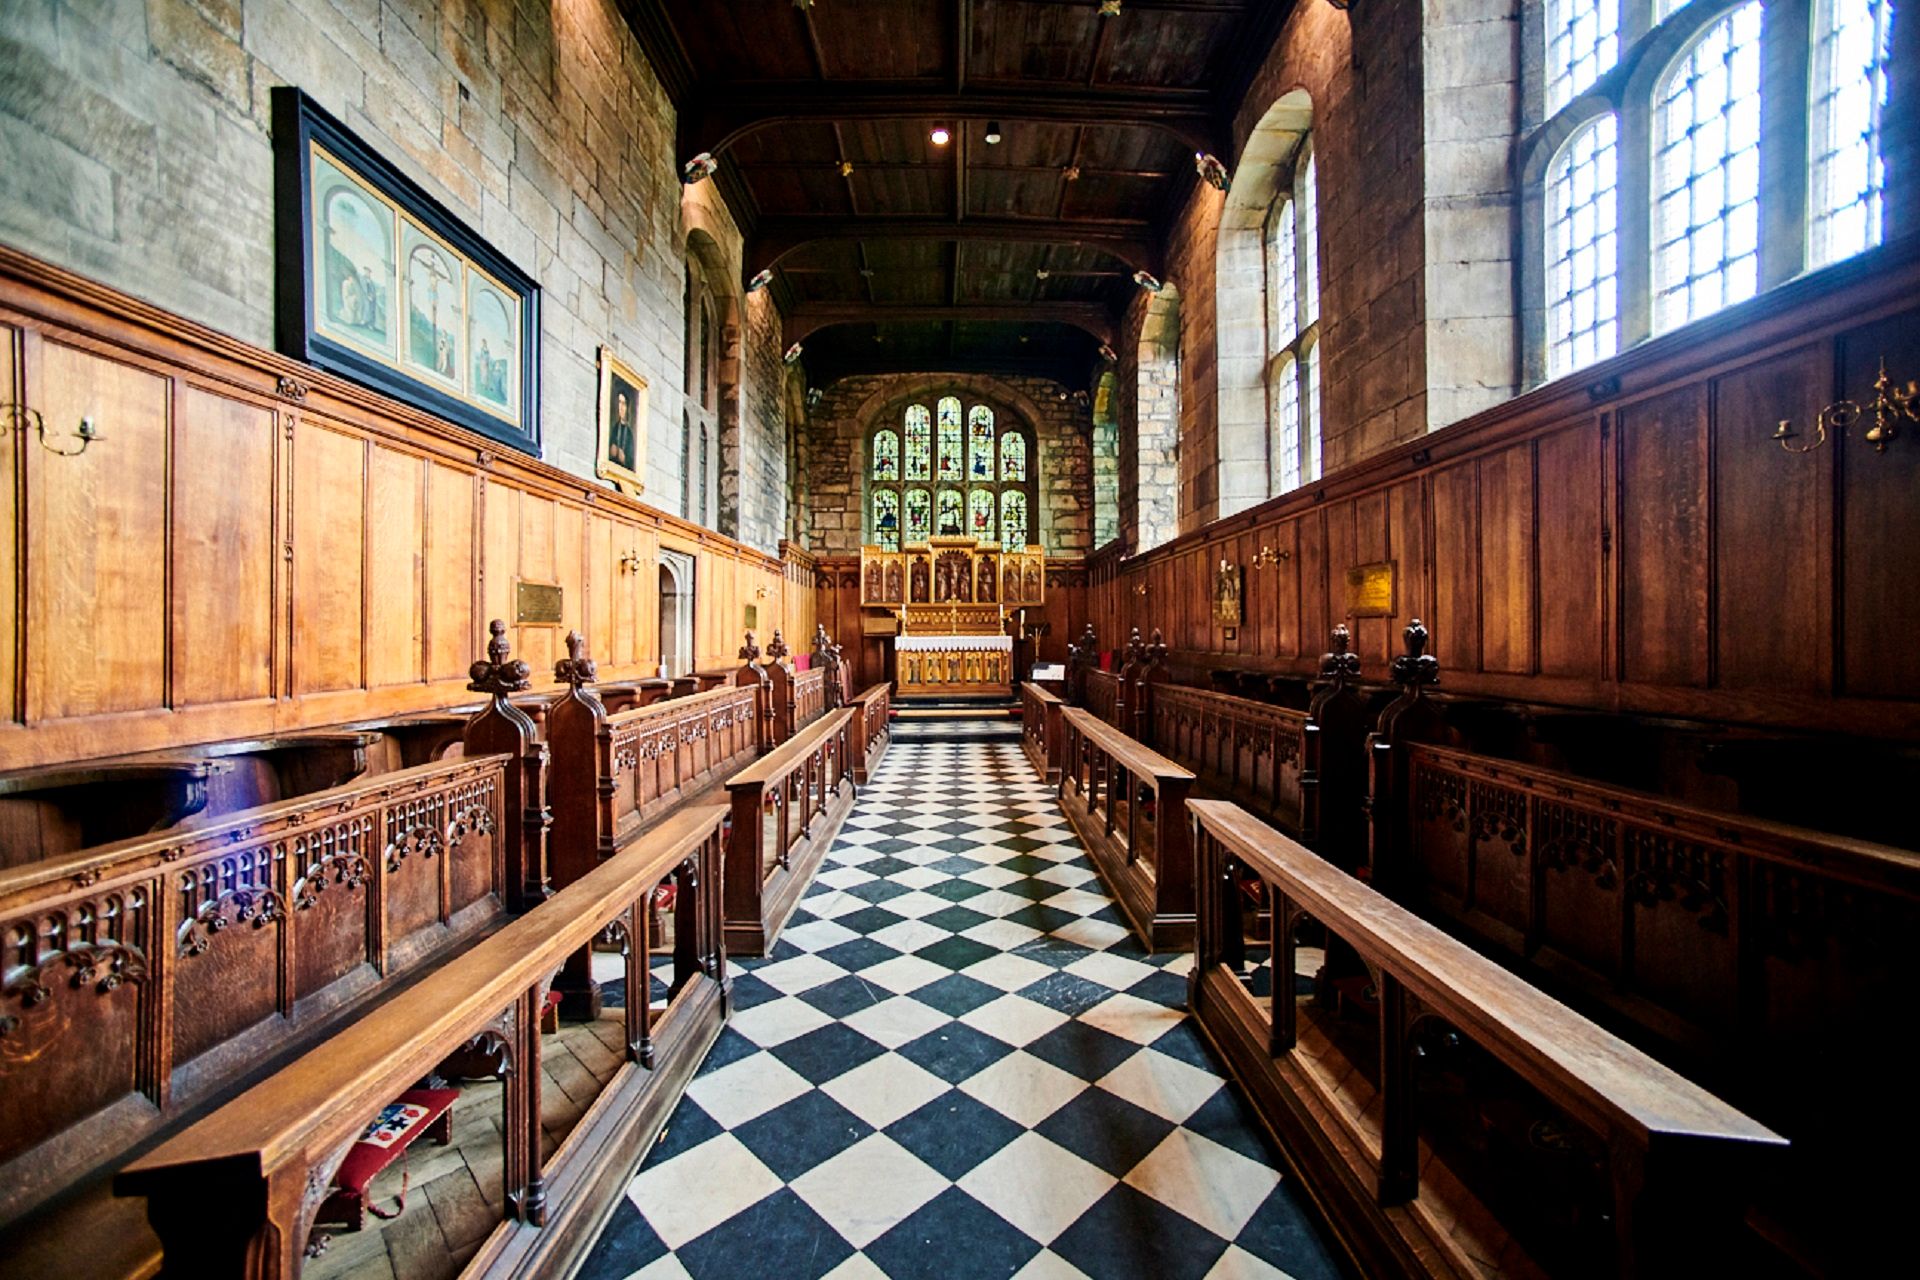 Photograph of the Tunstall Chapel and the stained glass at Durham Castle, at the centre is the altar and stained glass. At the sides are the pews and panelled walls.